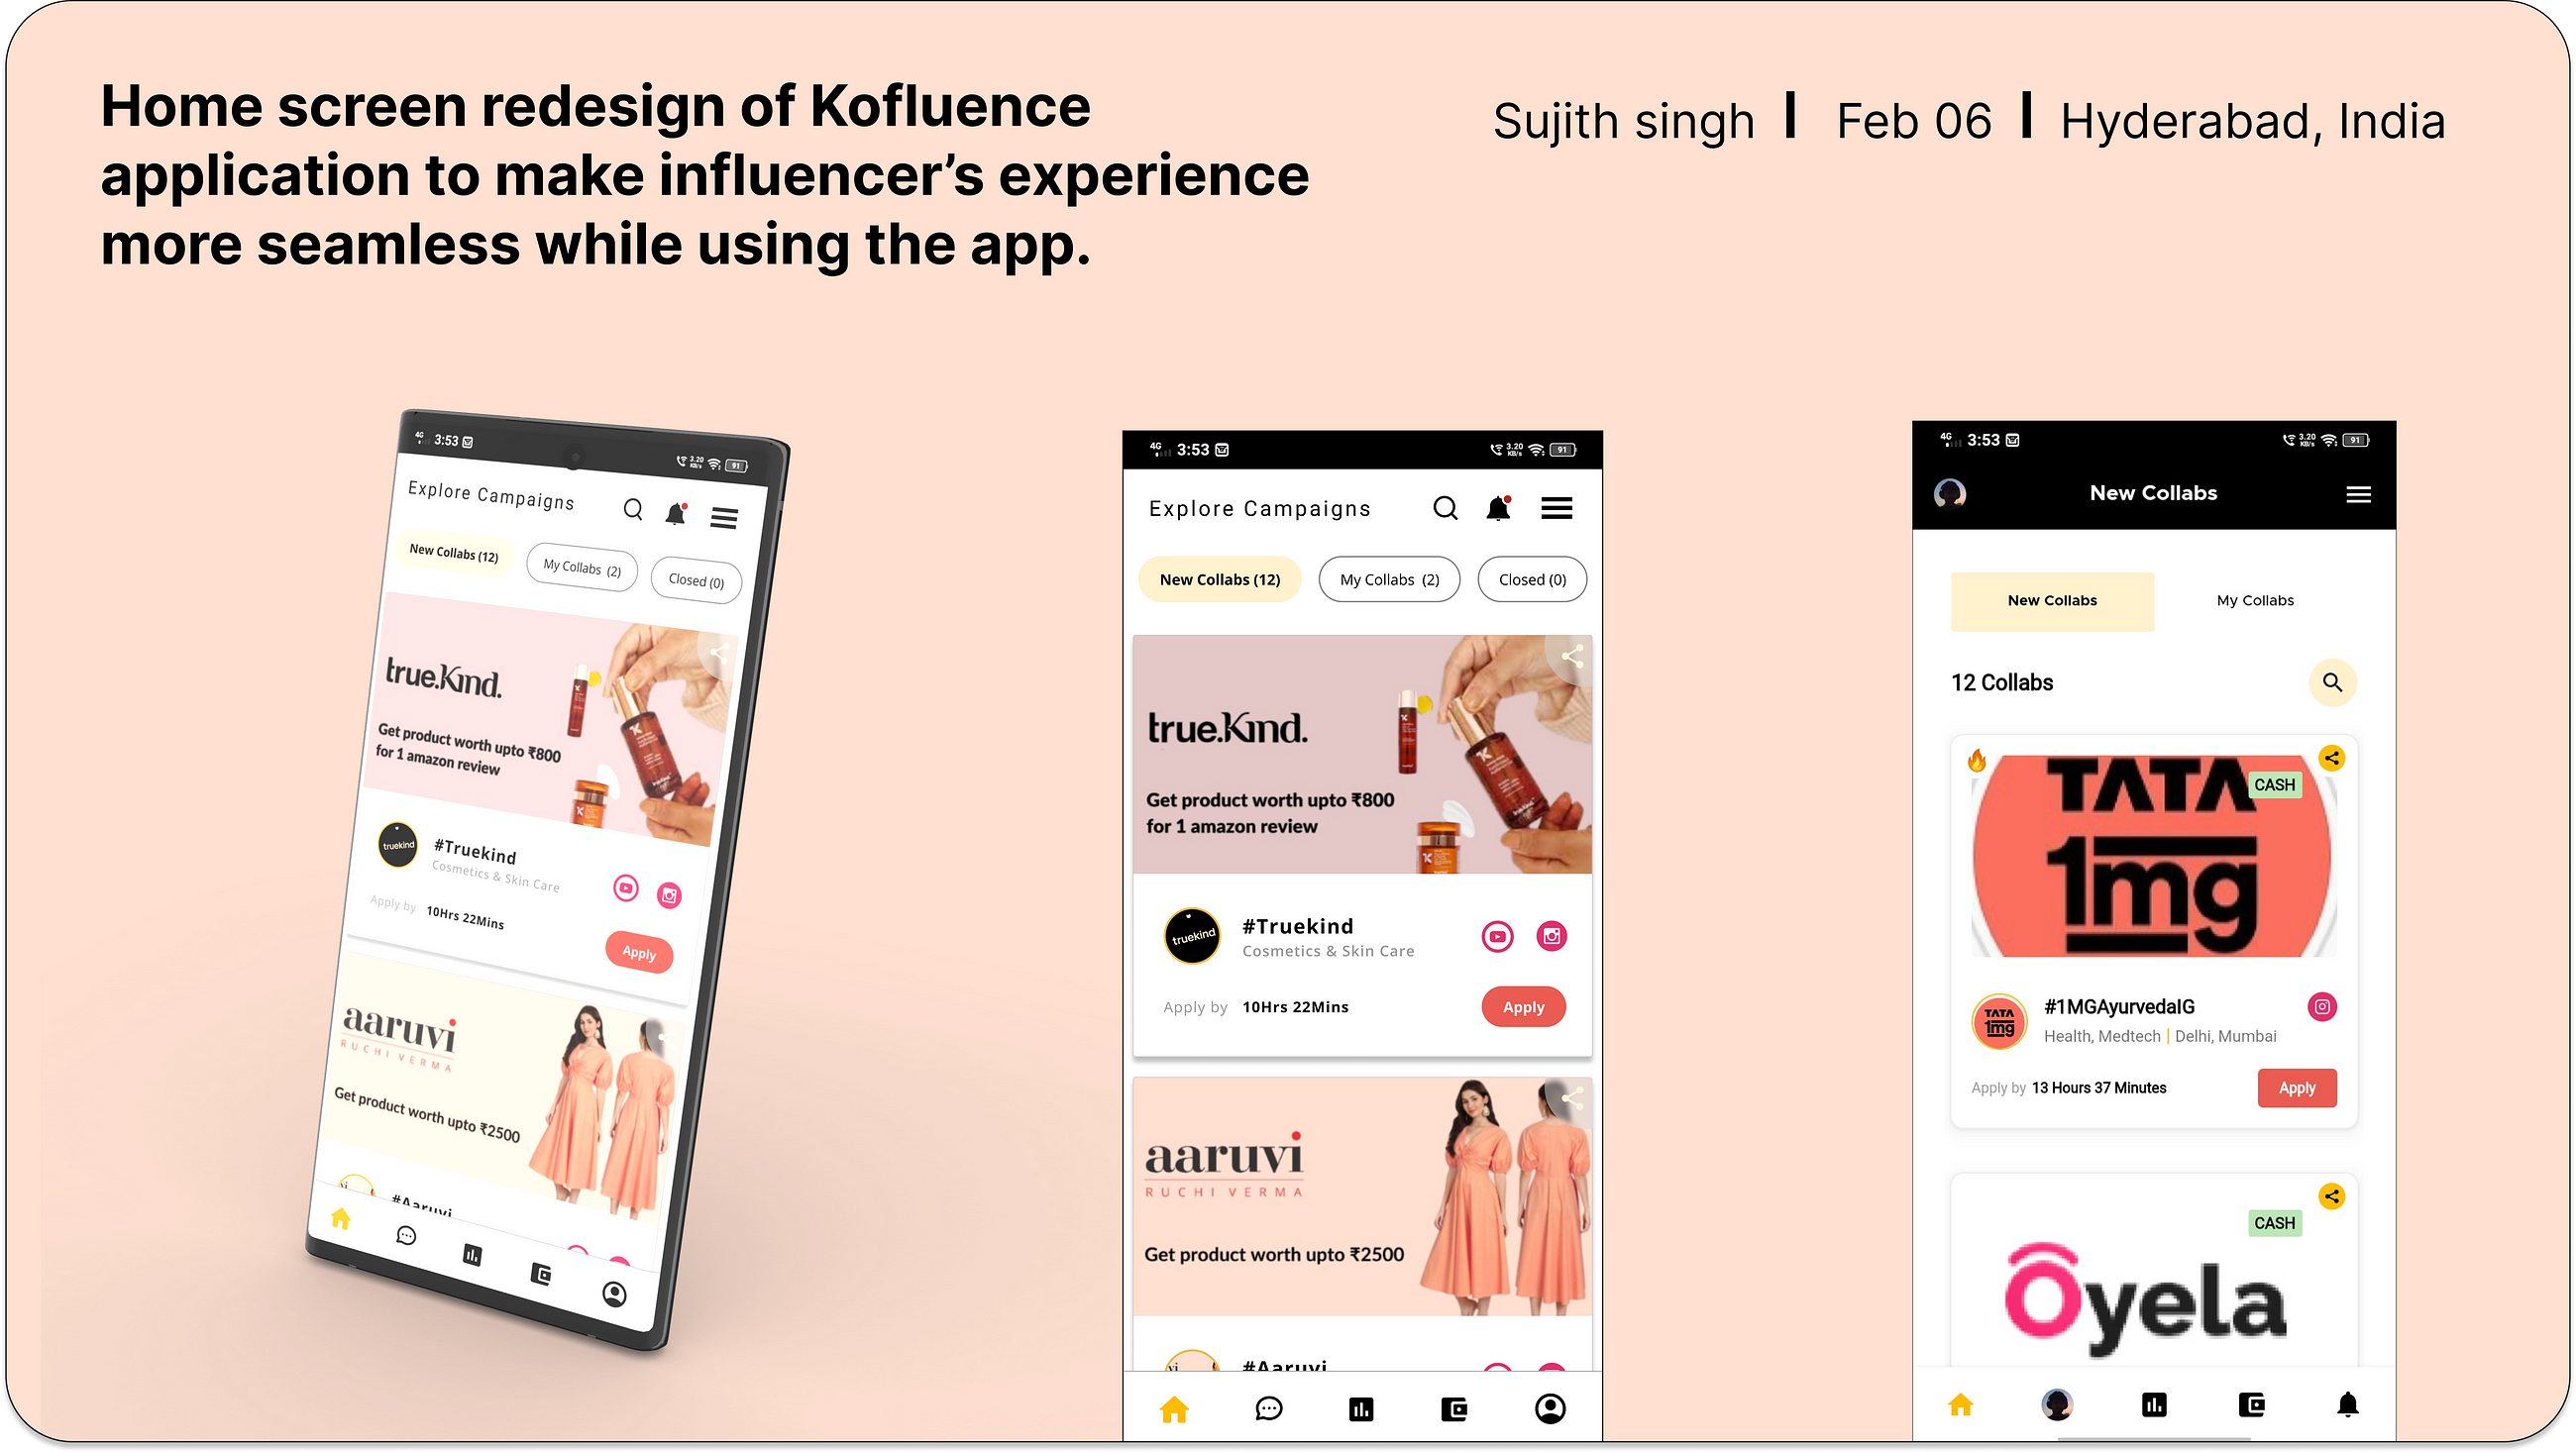 UX Redesign- Home screen experience of the Kofluence app